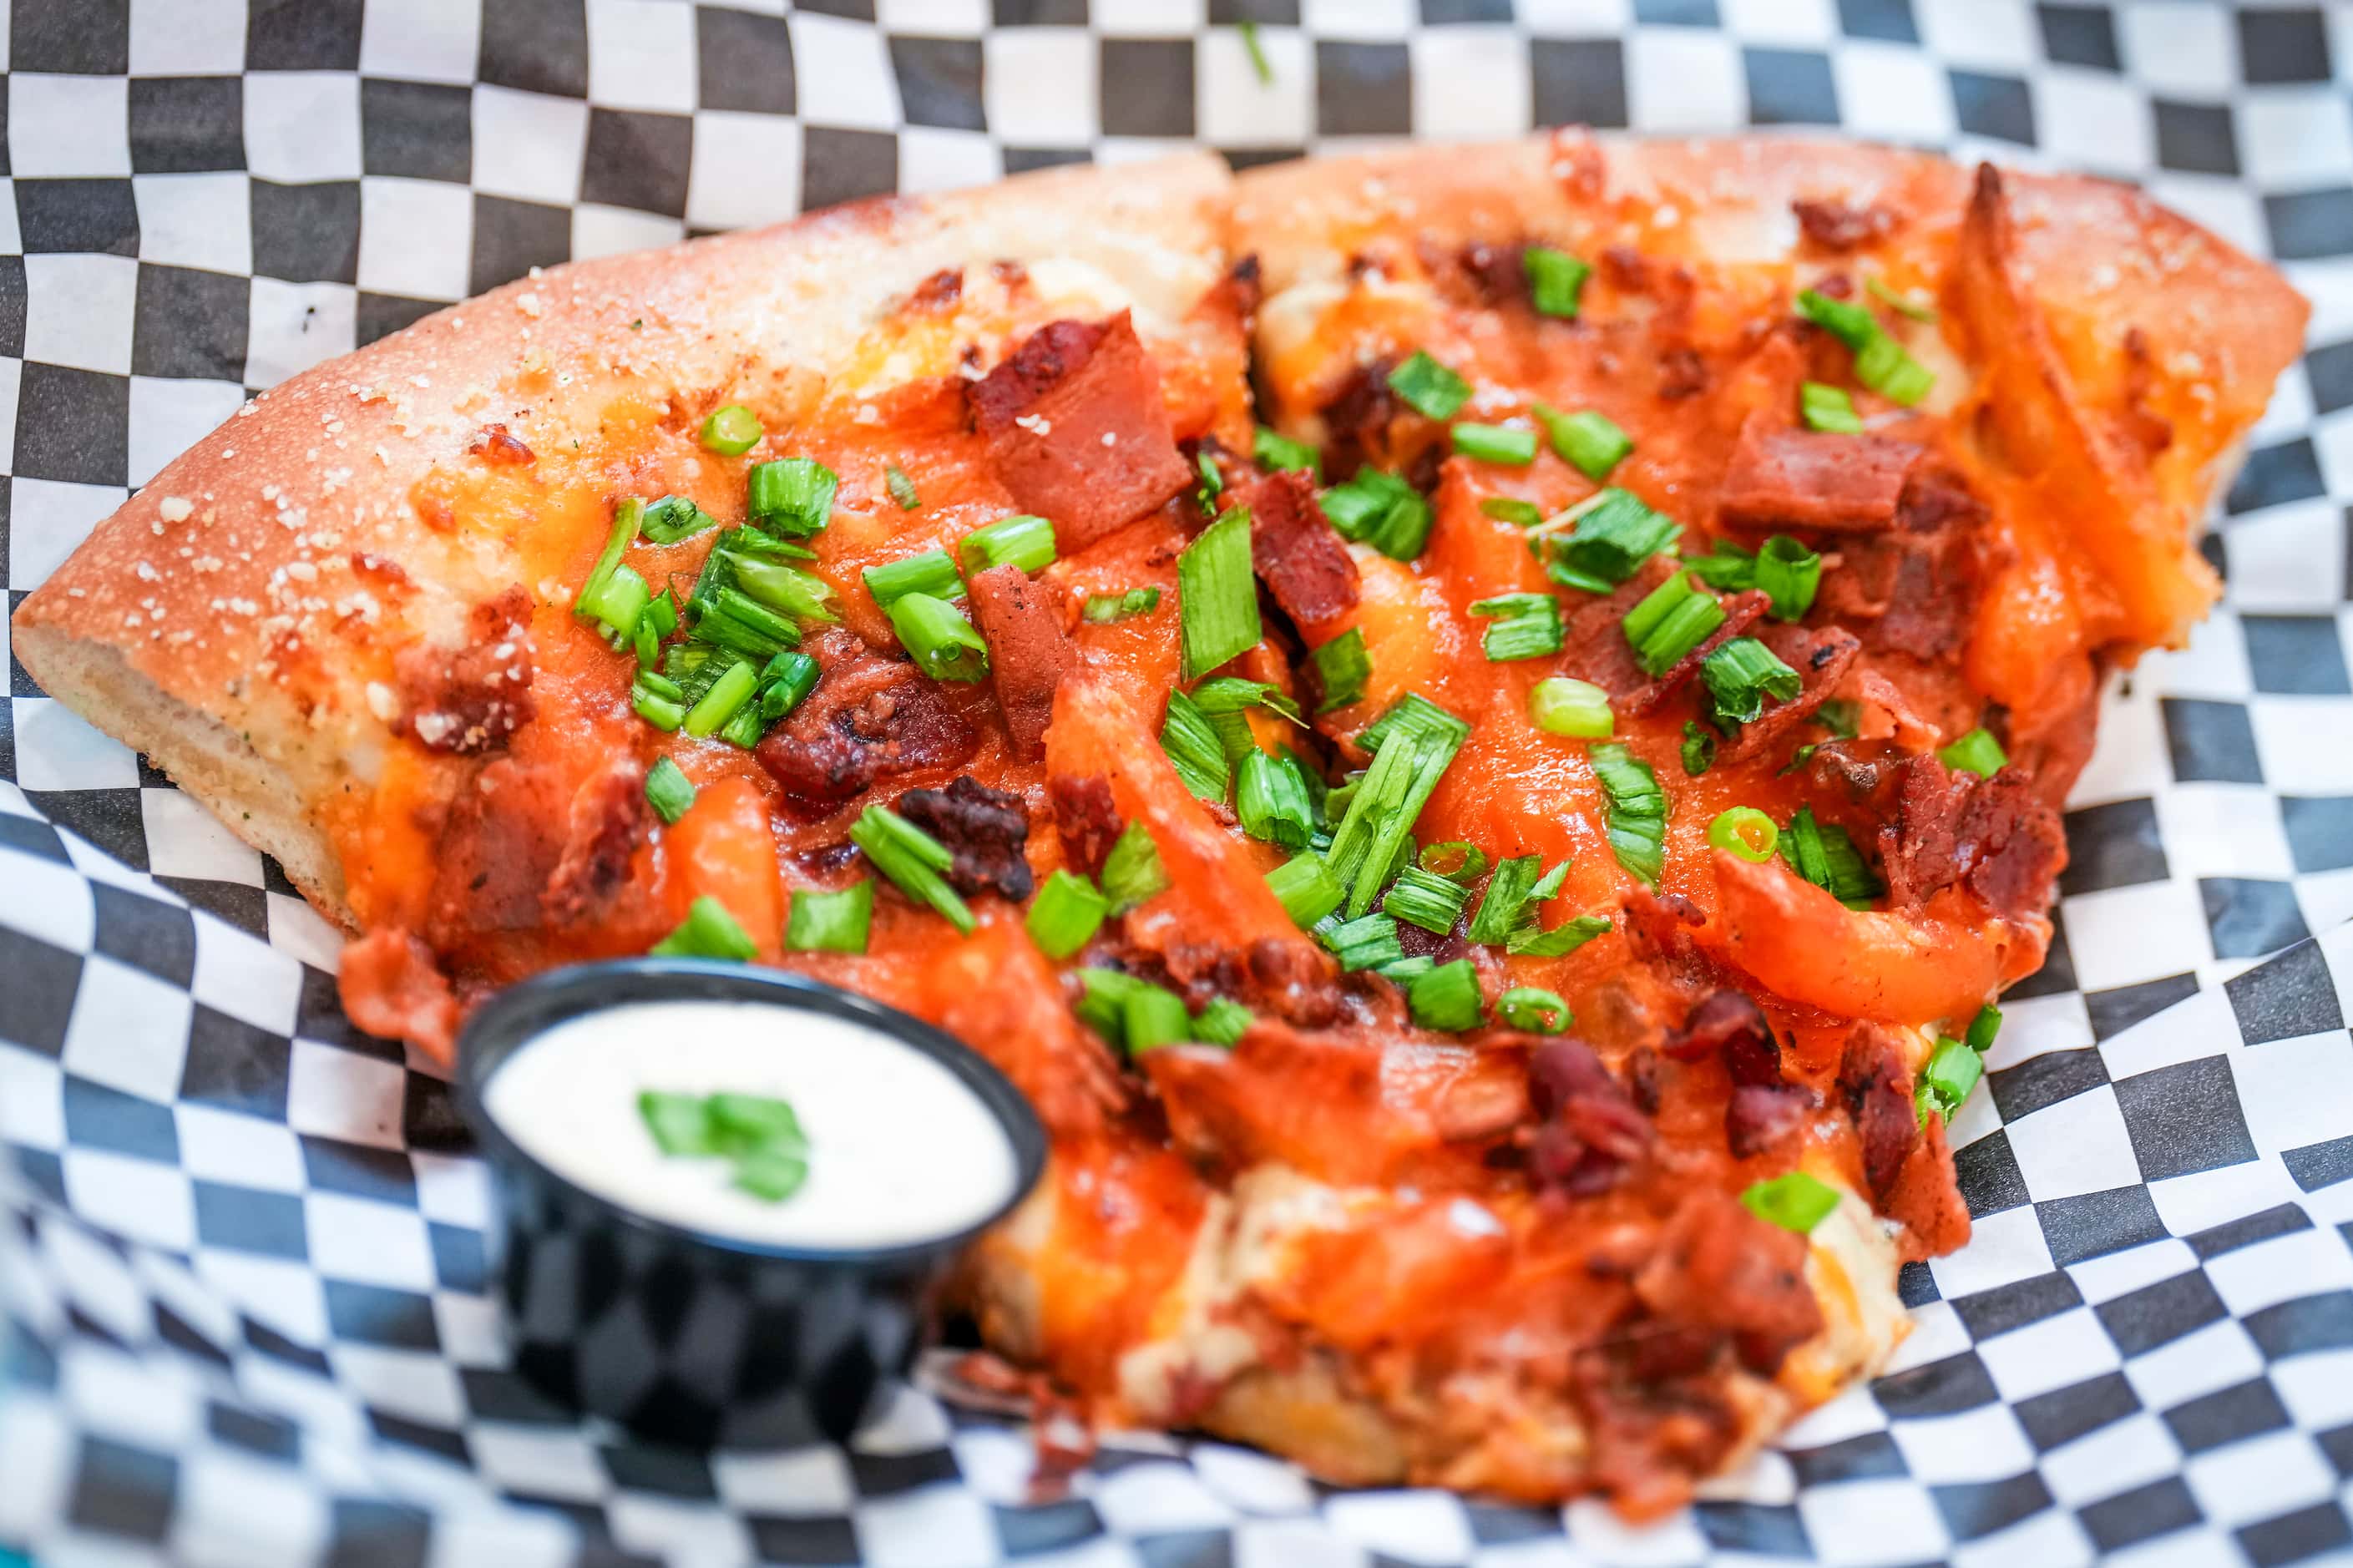 Loaded Fries Pizza by Tom Grace finalist for ‘best taste - savory’ at the 2023 Big Tex...